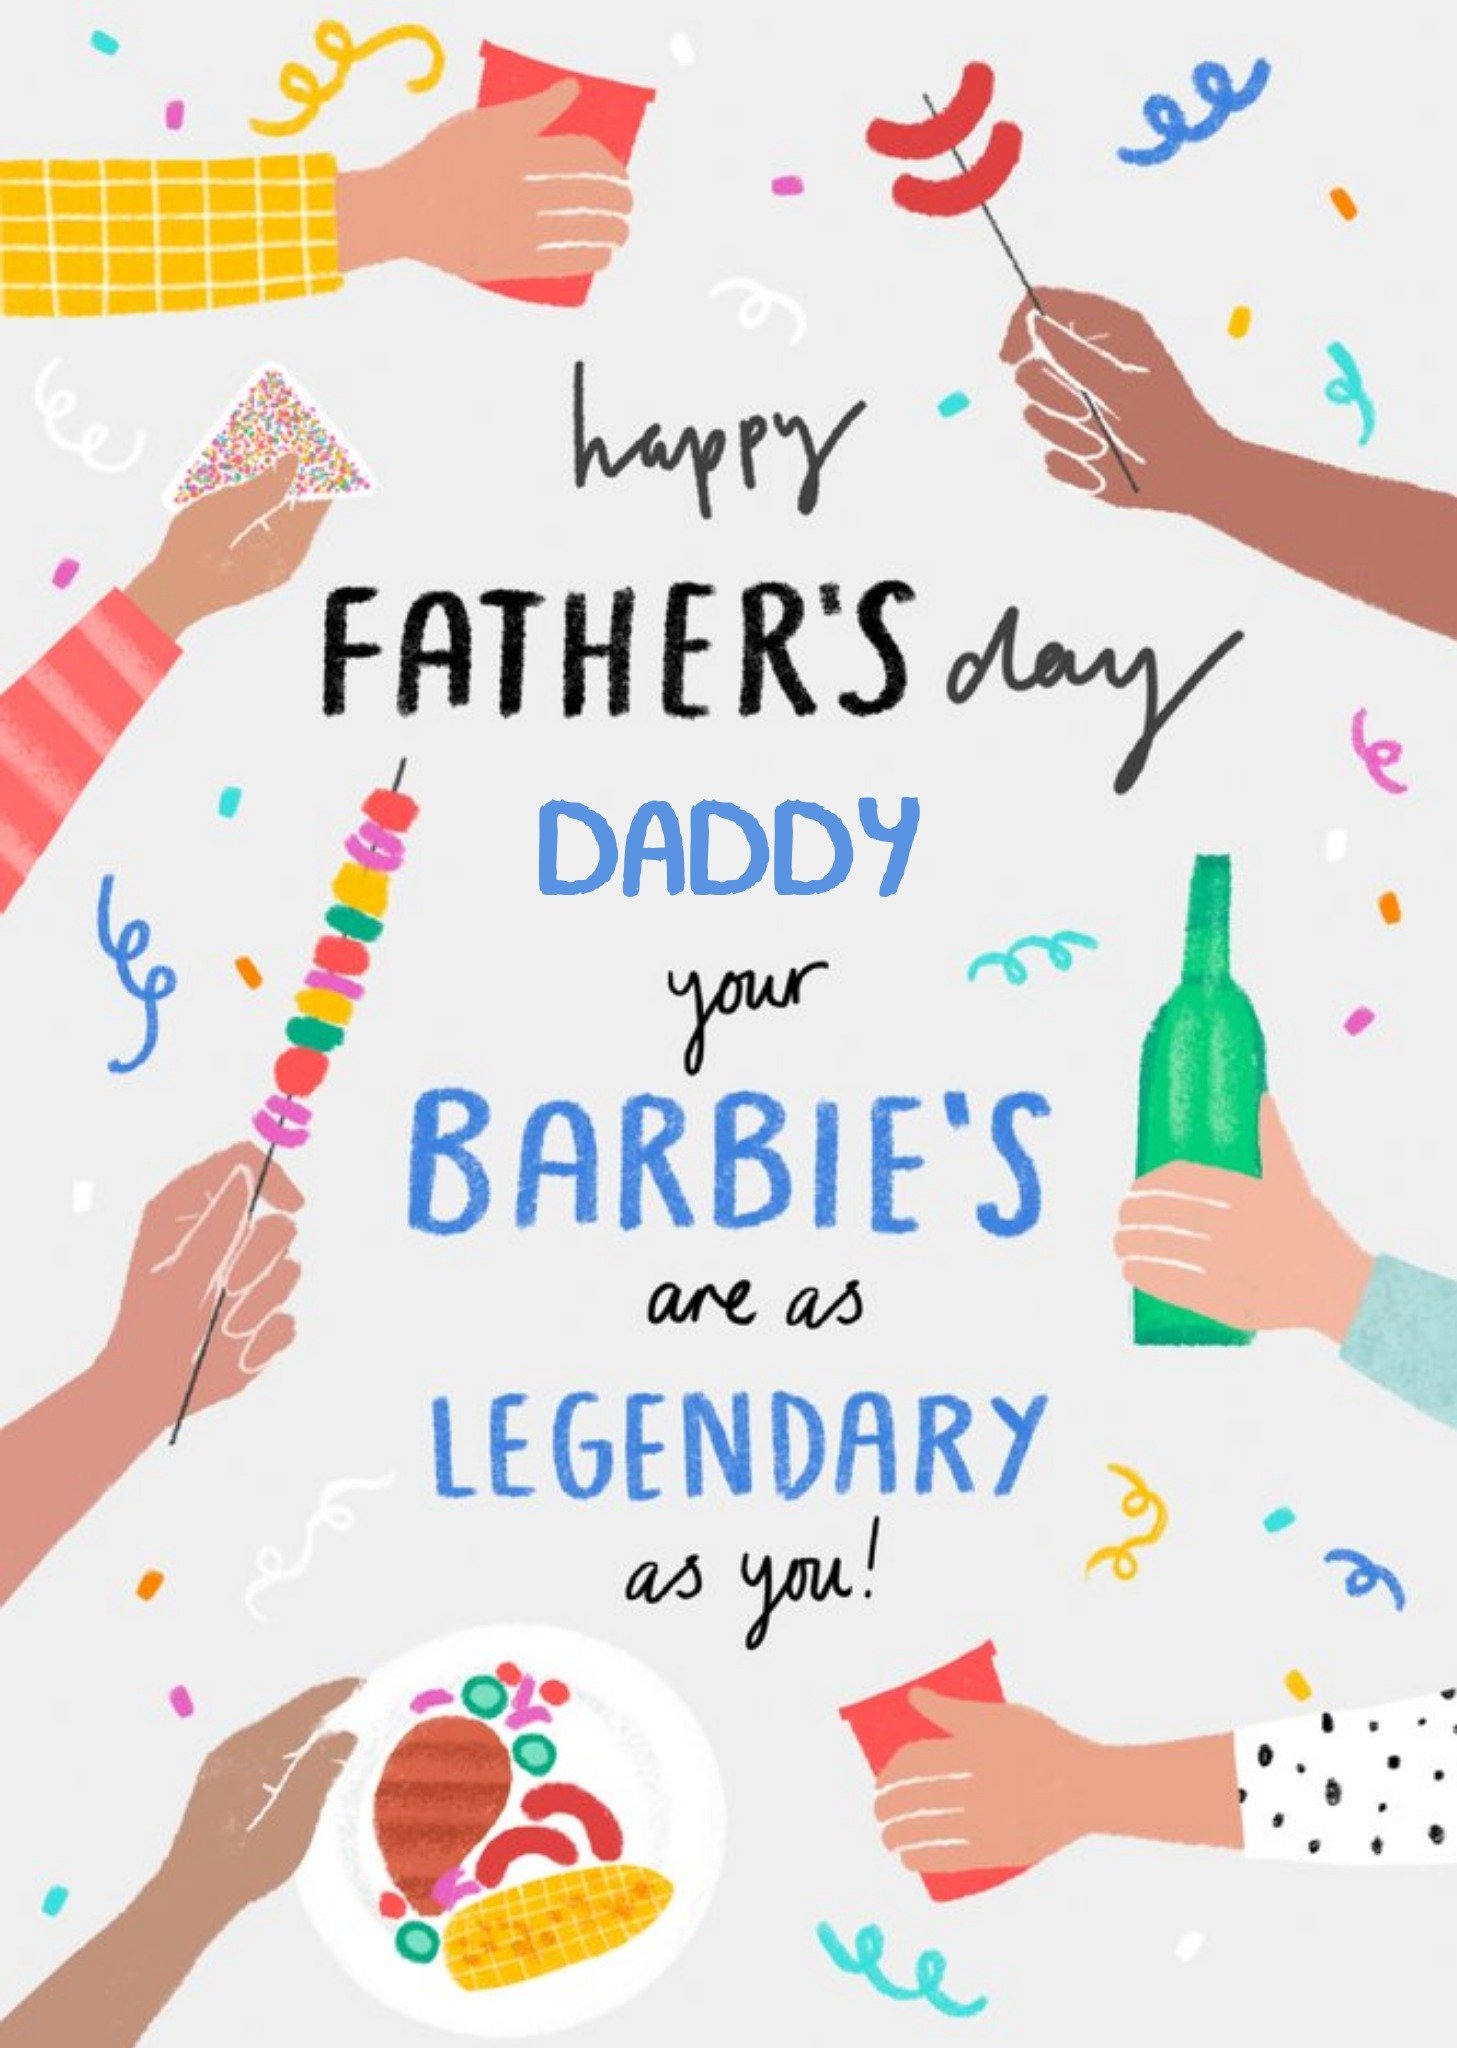 Moonpig Millicent Venton Customisable Illustrated Barbeque Father's Day Card Ecard